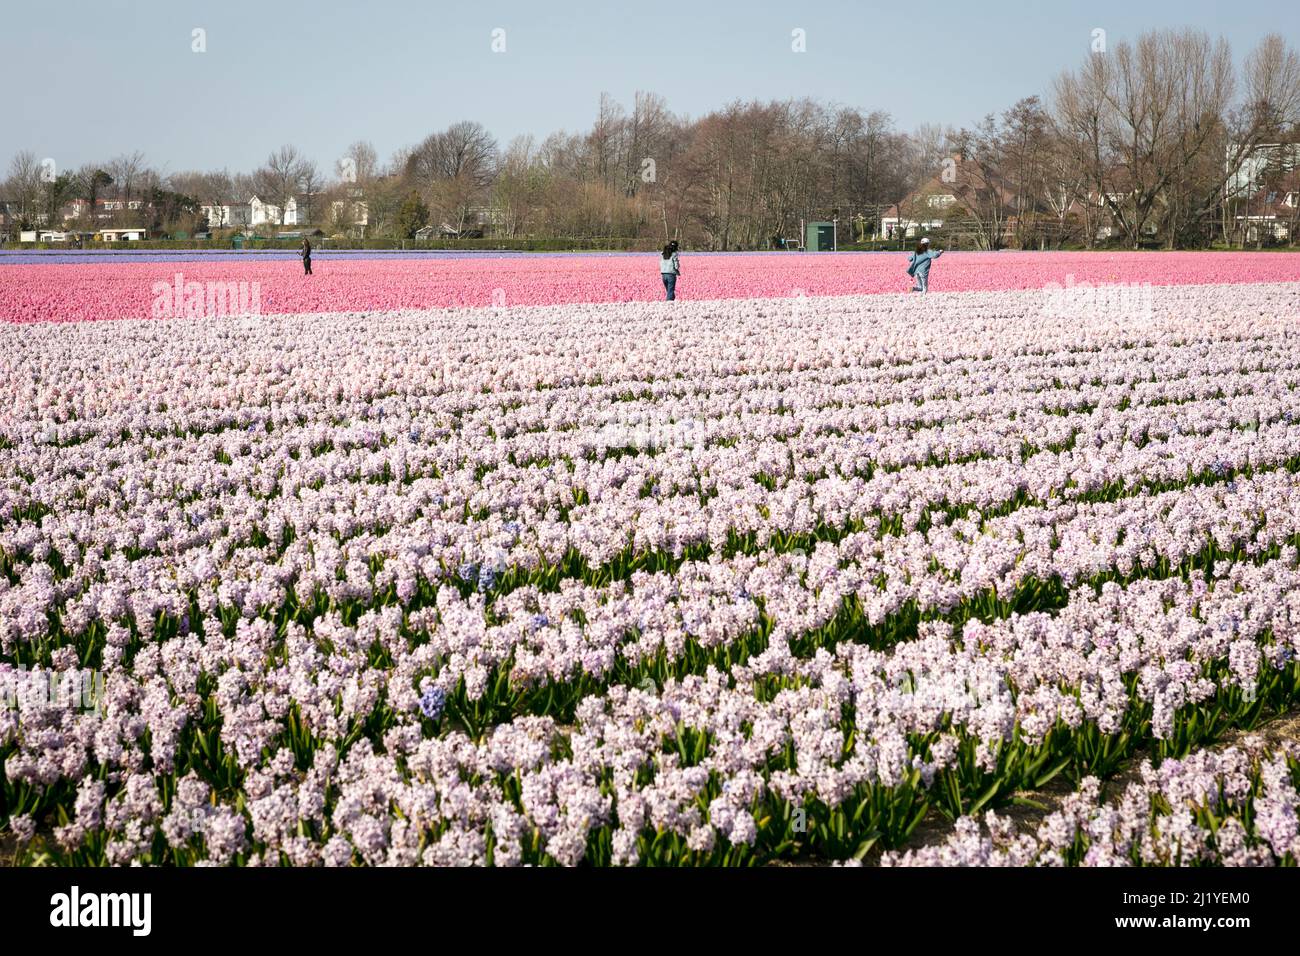 People walking among rows of Hyacinths (Hyacinthus Orientalis), in neat rows on an early Spring day in the Dutch flower fields around Lisse in the Netherlands. Stock Photo